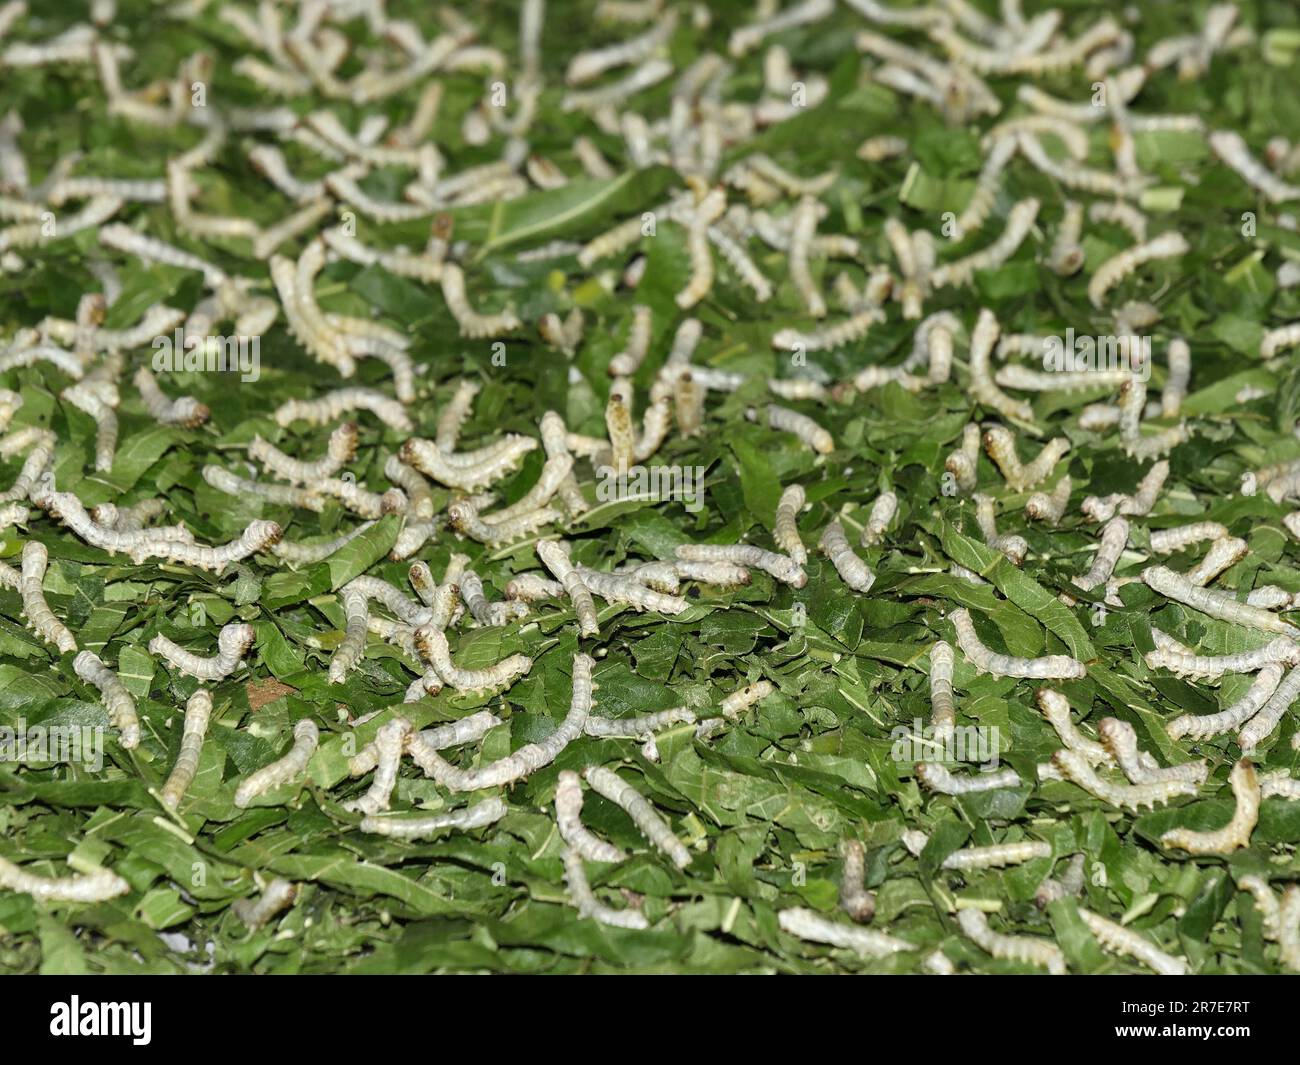 Seam Reap Province, Craft Industry, Silk work, Silkworms eating Leaves of Mulberry, Cambodia Stock Photo